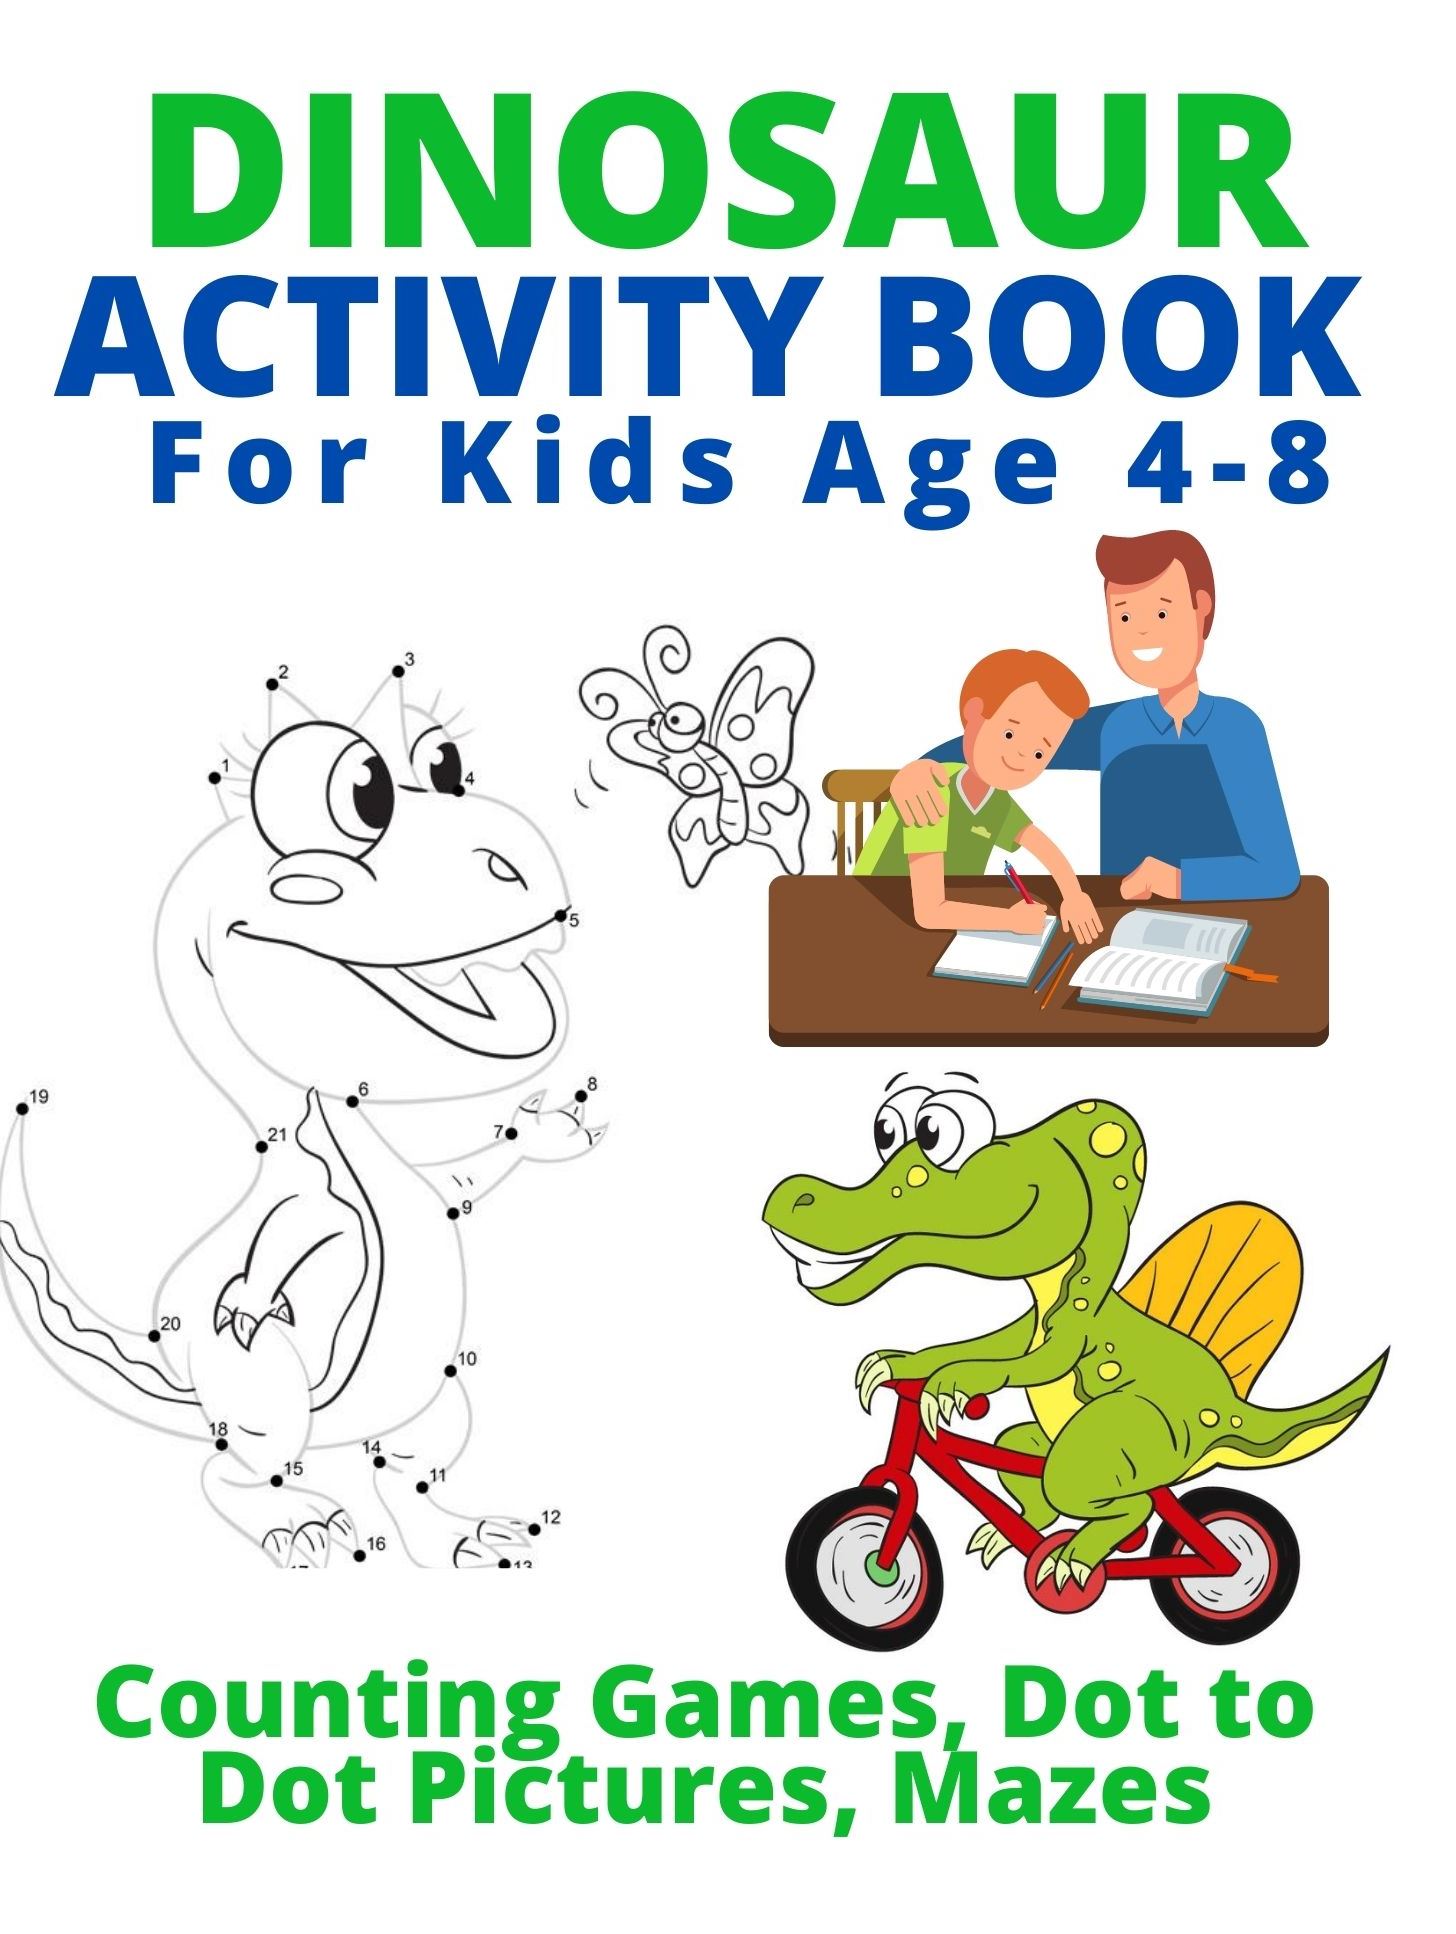 Kids Activity Coloring Book Age 4-8: Sea & Beach. See Say Spell & Color  Series – Books by Kathy Heshelow